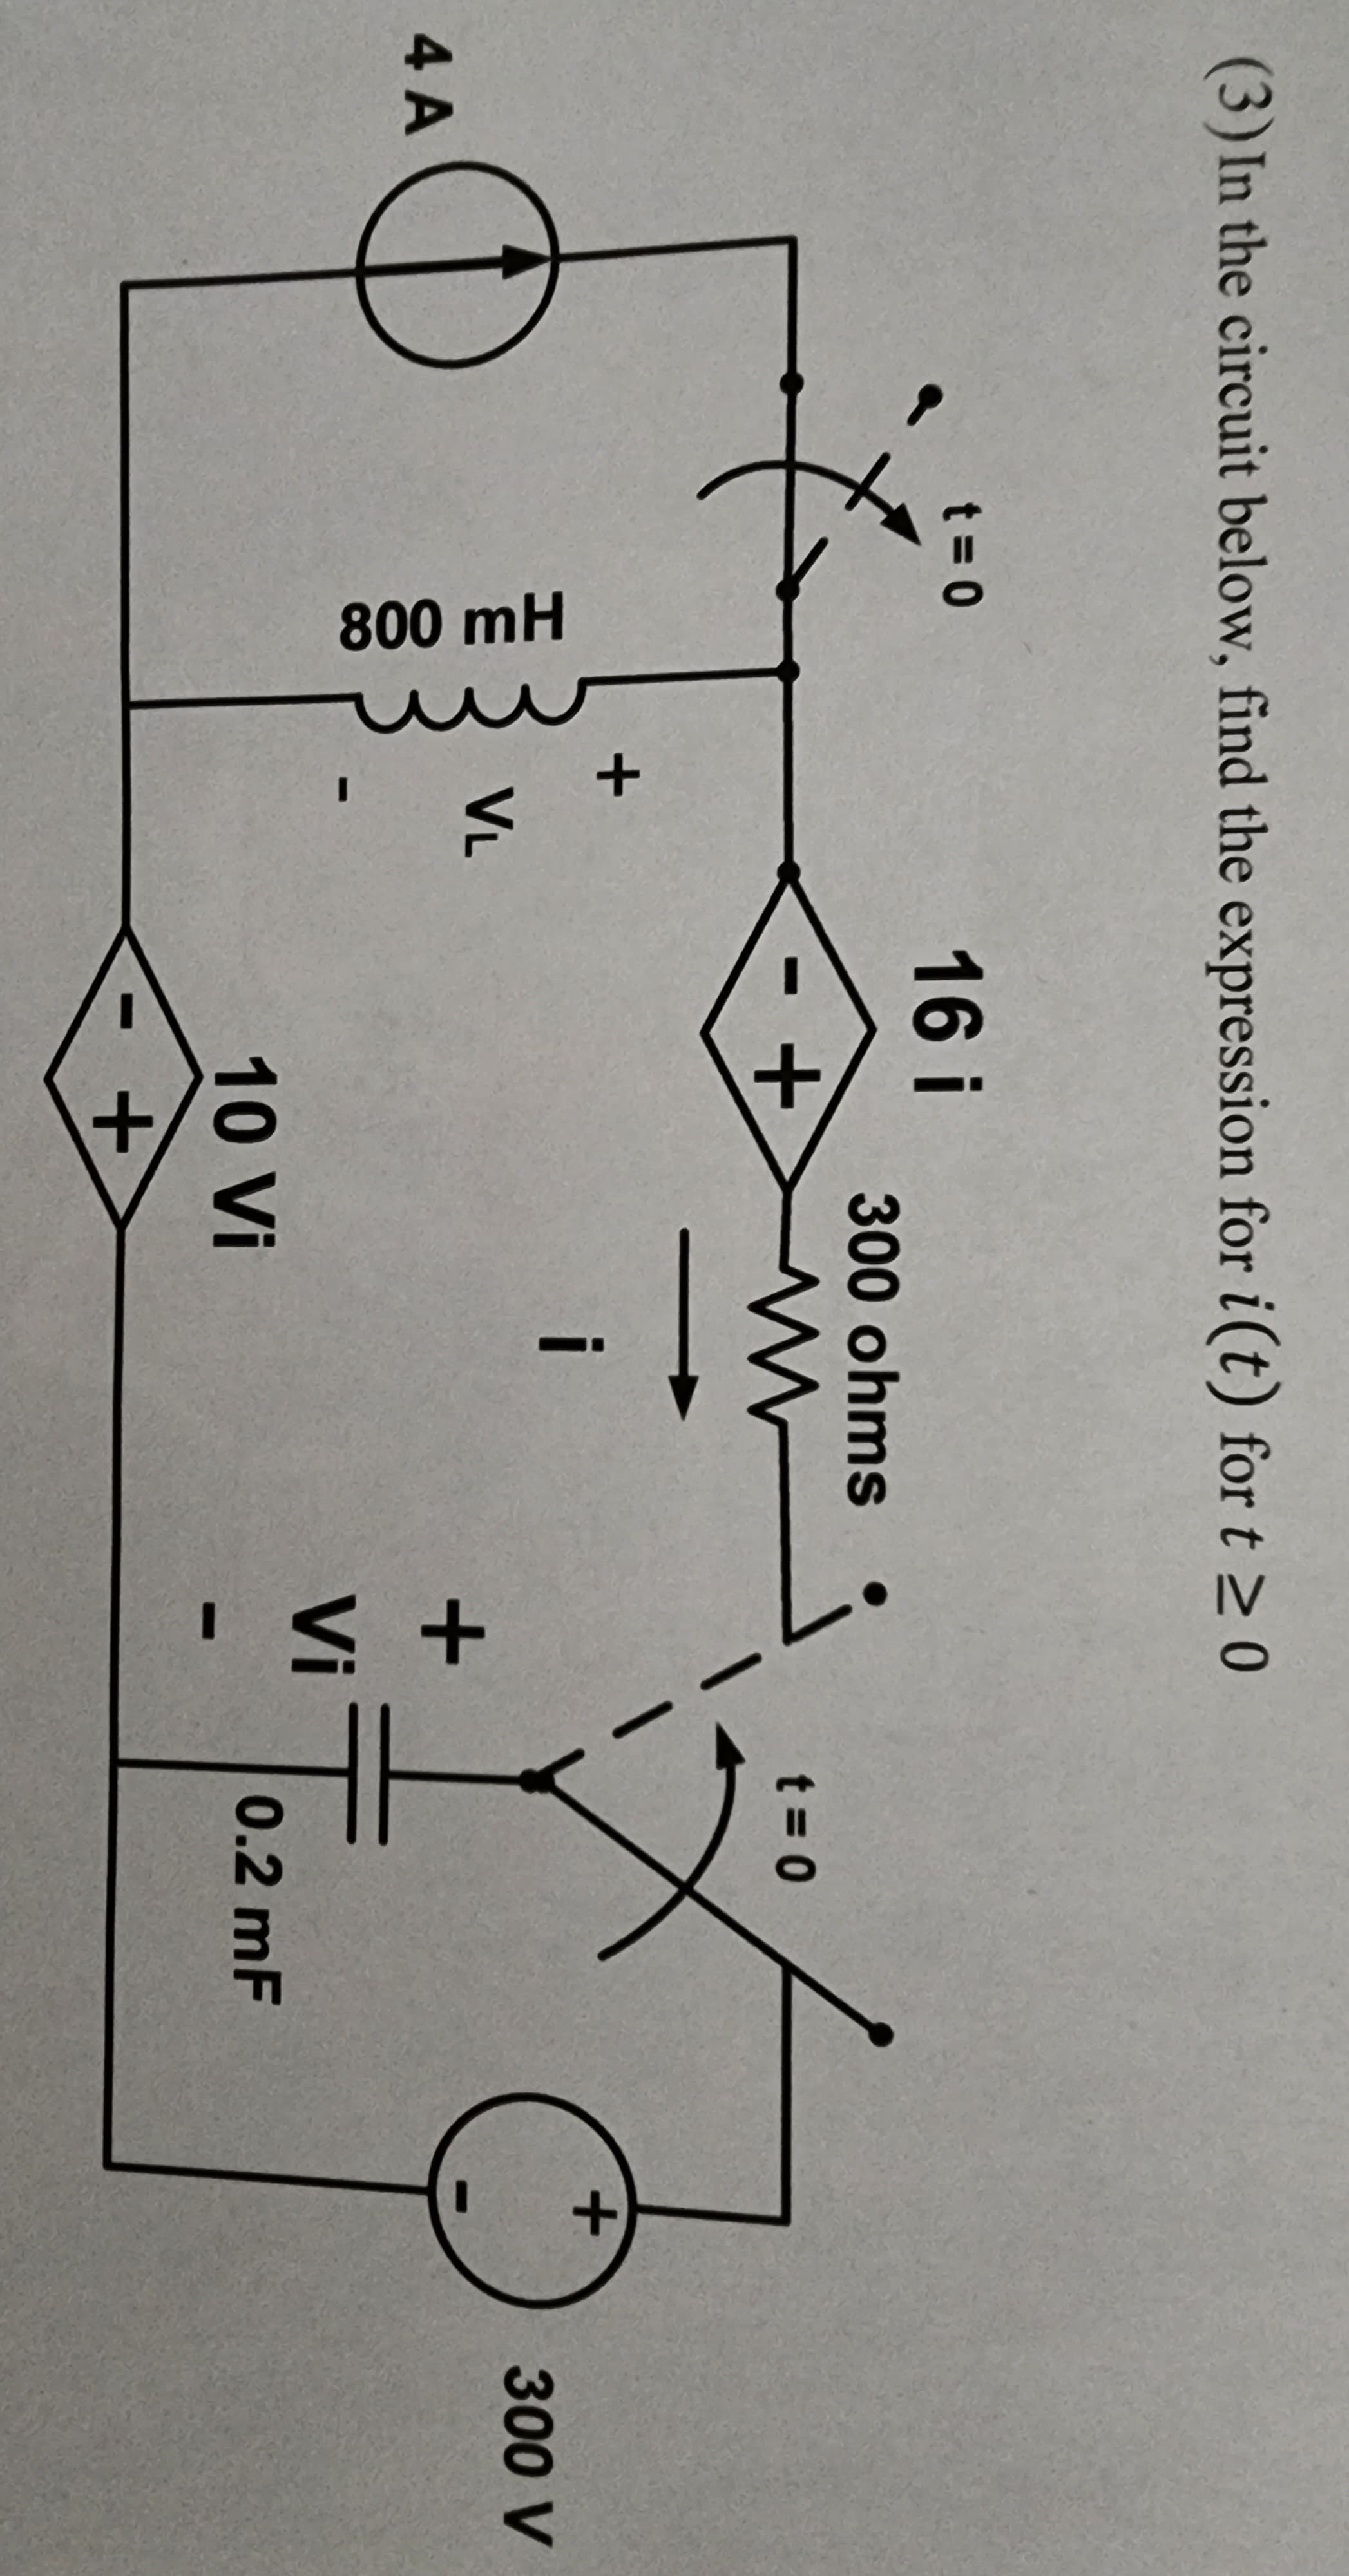 (3) In the circuit below, find the expression for i(t) for t≥ 0
4 A
t=0
800 mH
+
VL
16 i
+
300 ohms
10 Vi
+
i
oj
+ 5
Vi
t=0
0.2 mF
+
300 V